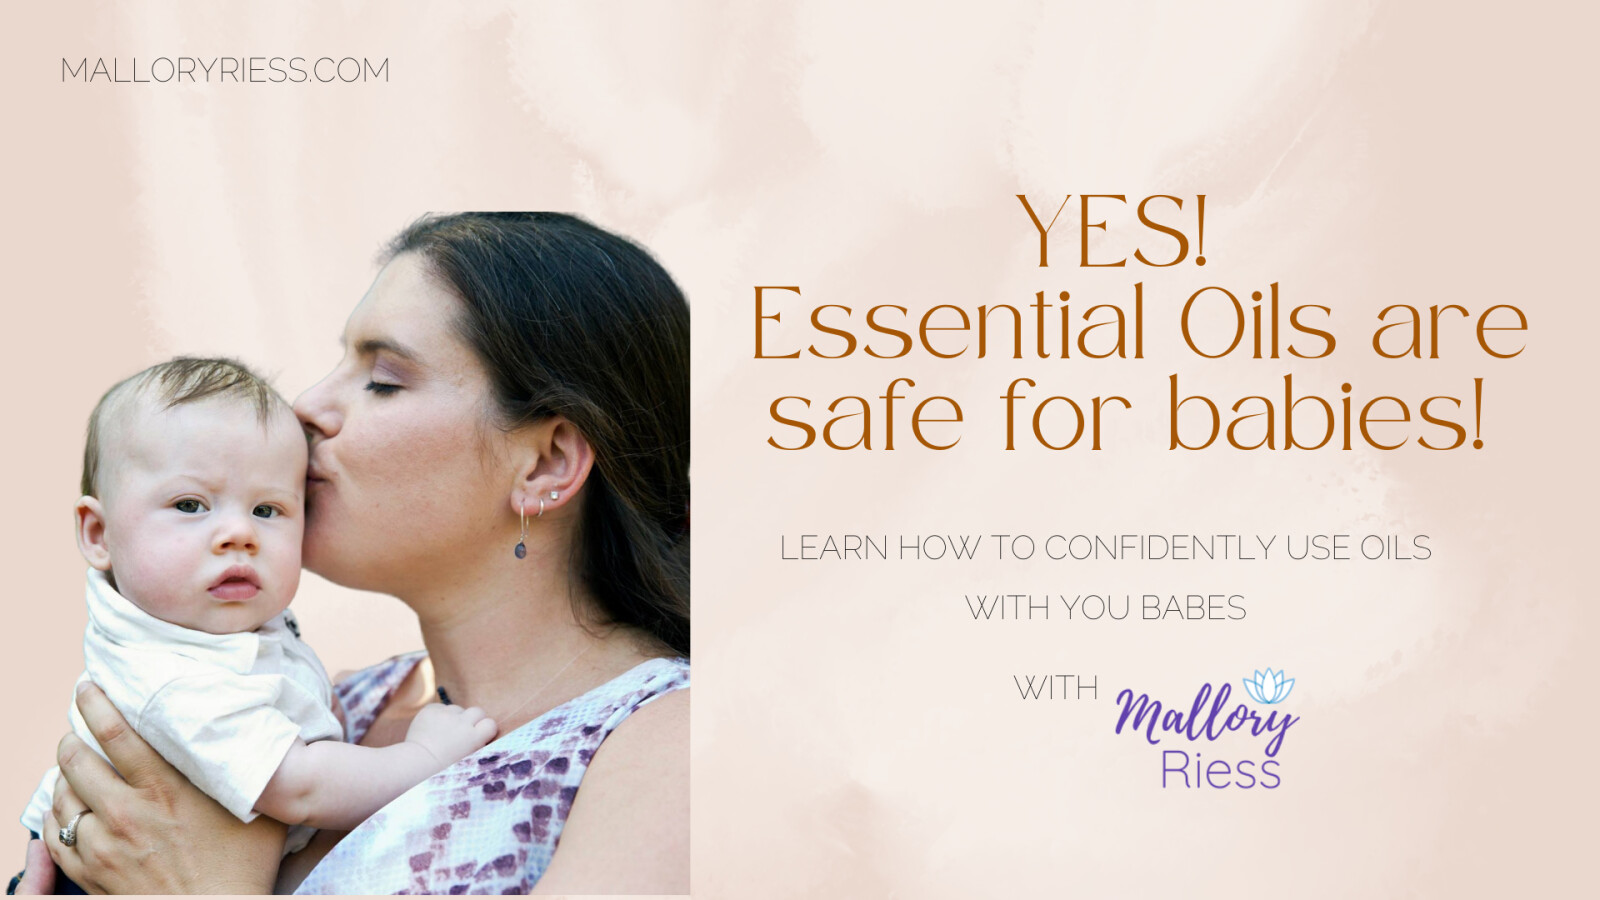 YES, Essential Oils are Safe for Babies!